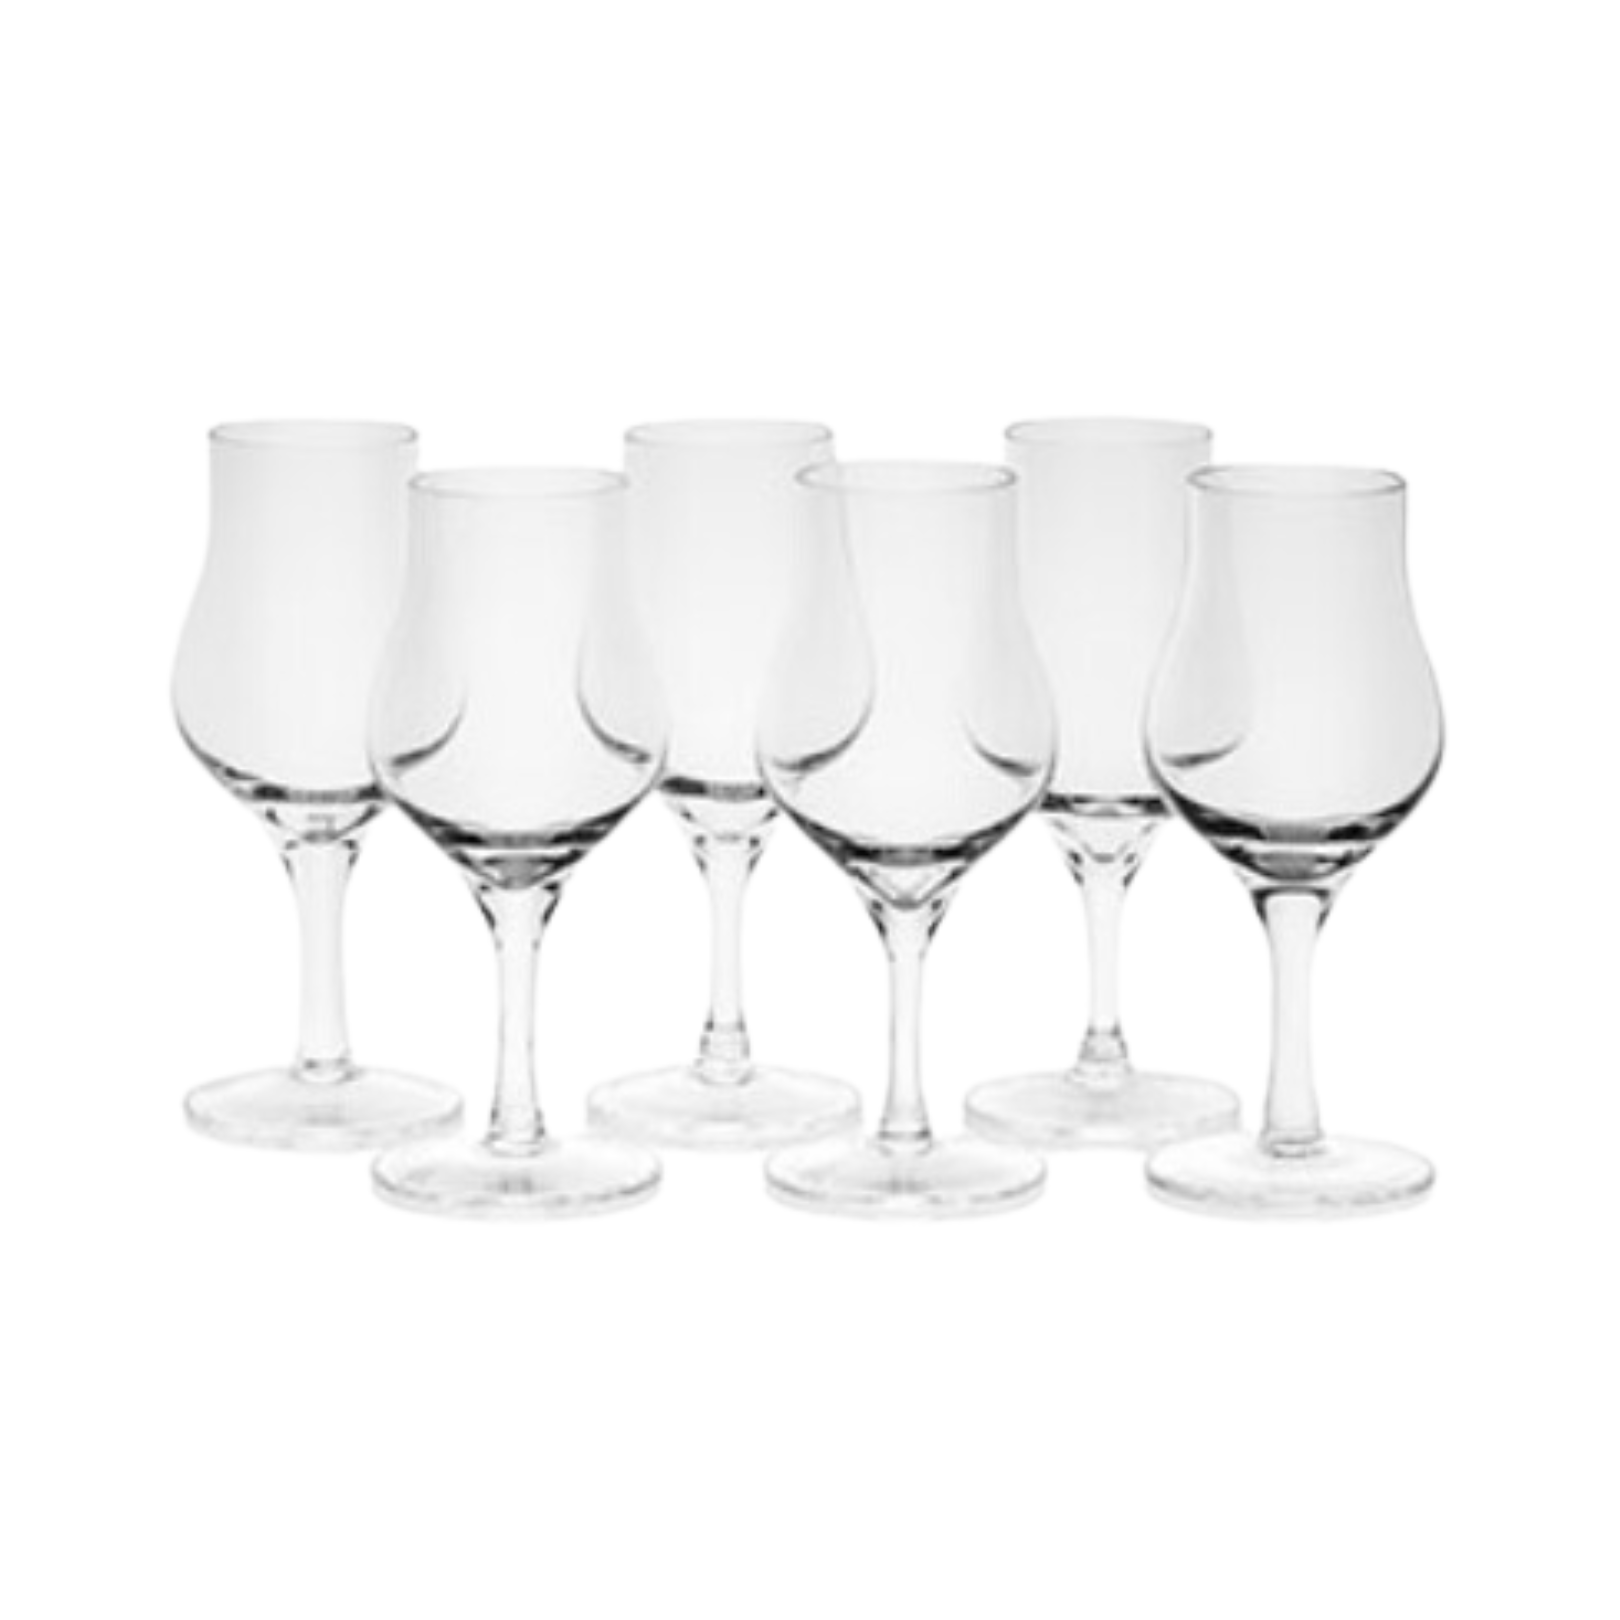 Amber Handmade Whisky Nosing & Tasting Glasses G100 - Pack of 6 (Without Lid or Gift Box)